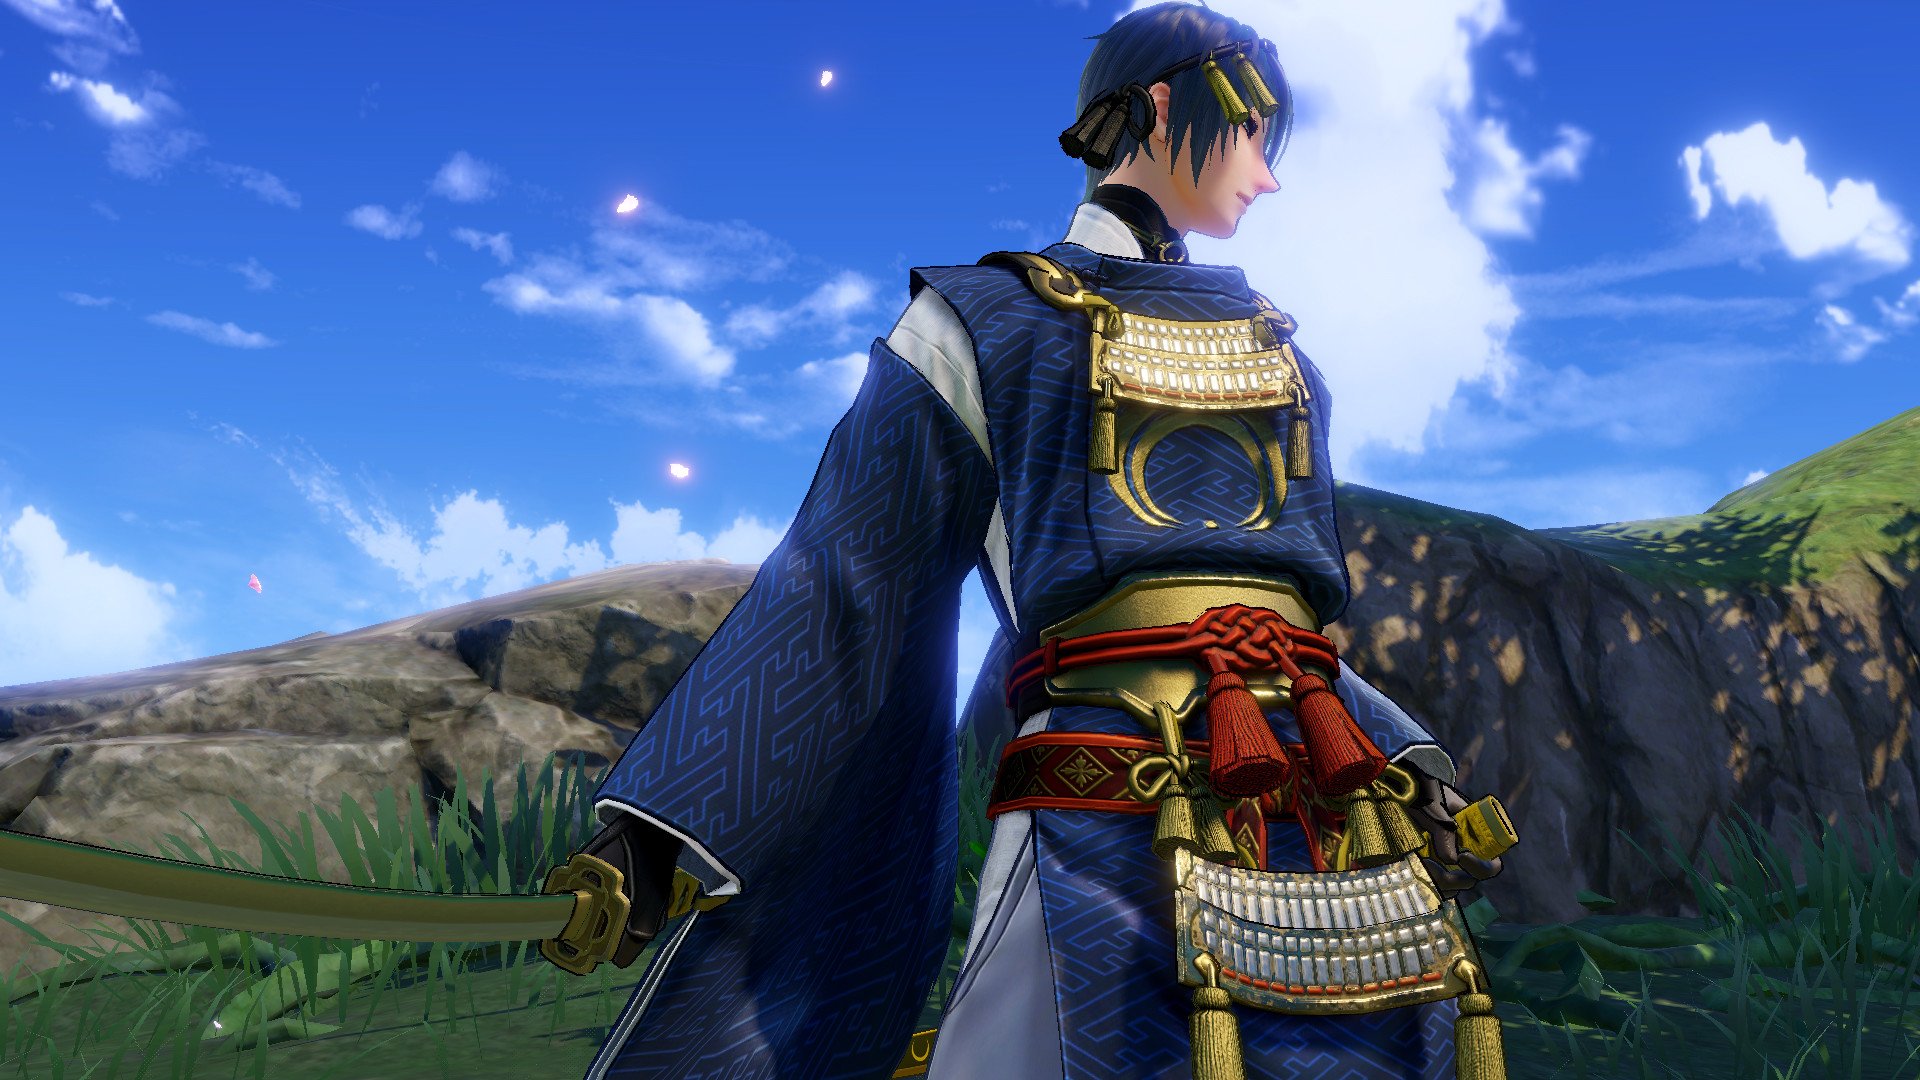 Touken Ranbu Warriors for PC coming west on May 24 - Gematsu